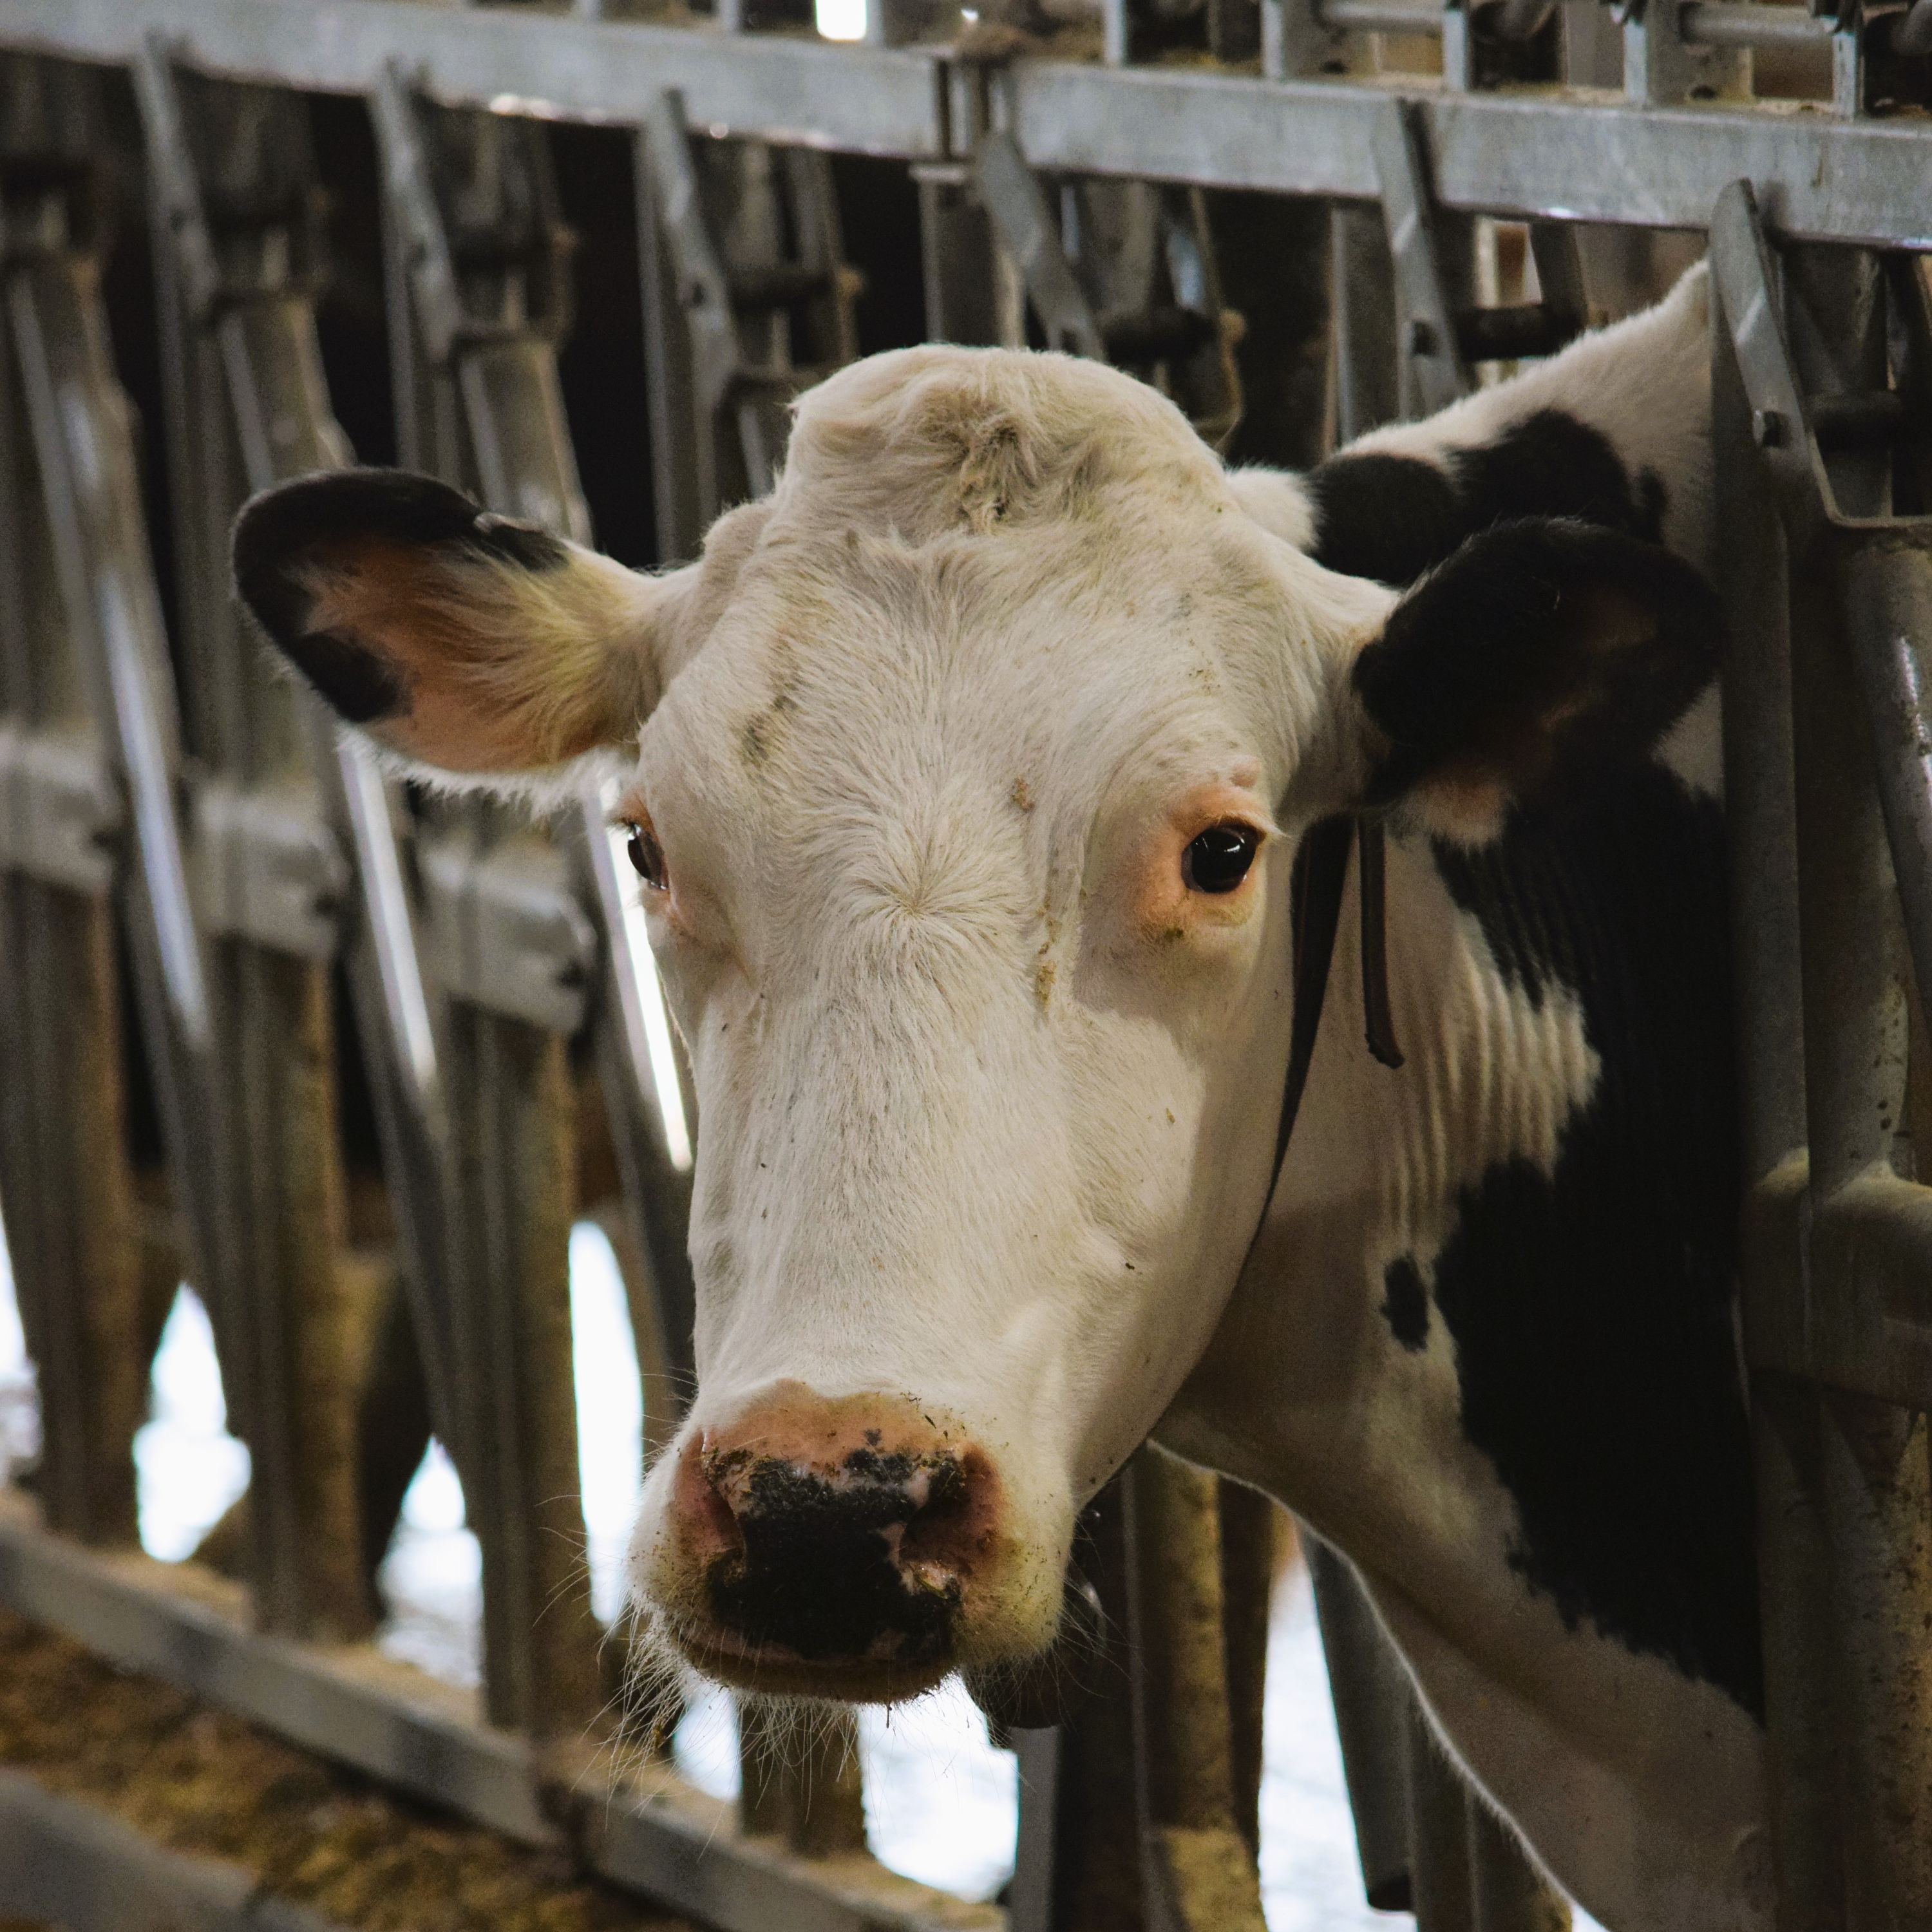 Required testing for lactating dairy cattle prior to fairs